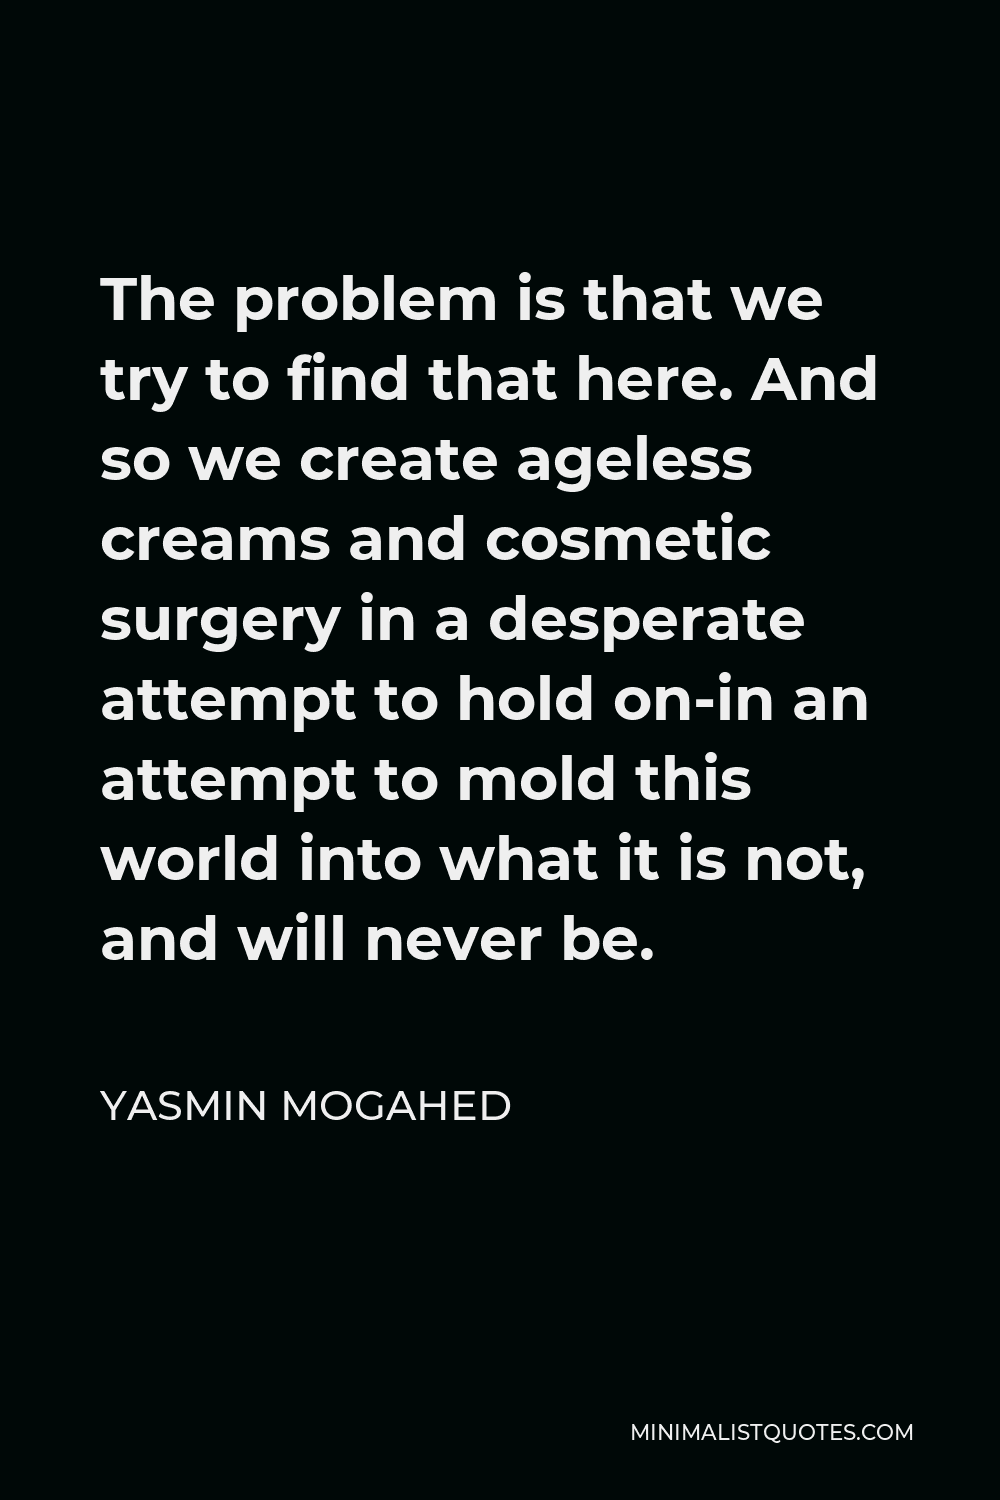 Yasmin Mogahed Quote - The problem is that we try to find that here. And so we create ageless creams and cosmetic surgery in a desperate attempt to hold on-in an attempt to mold this world into what it is not, and will never be.